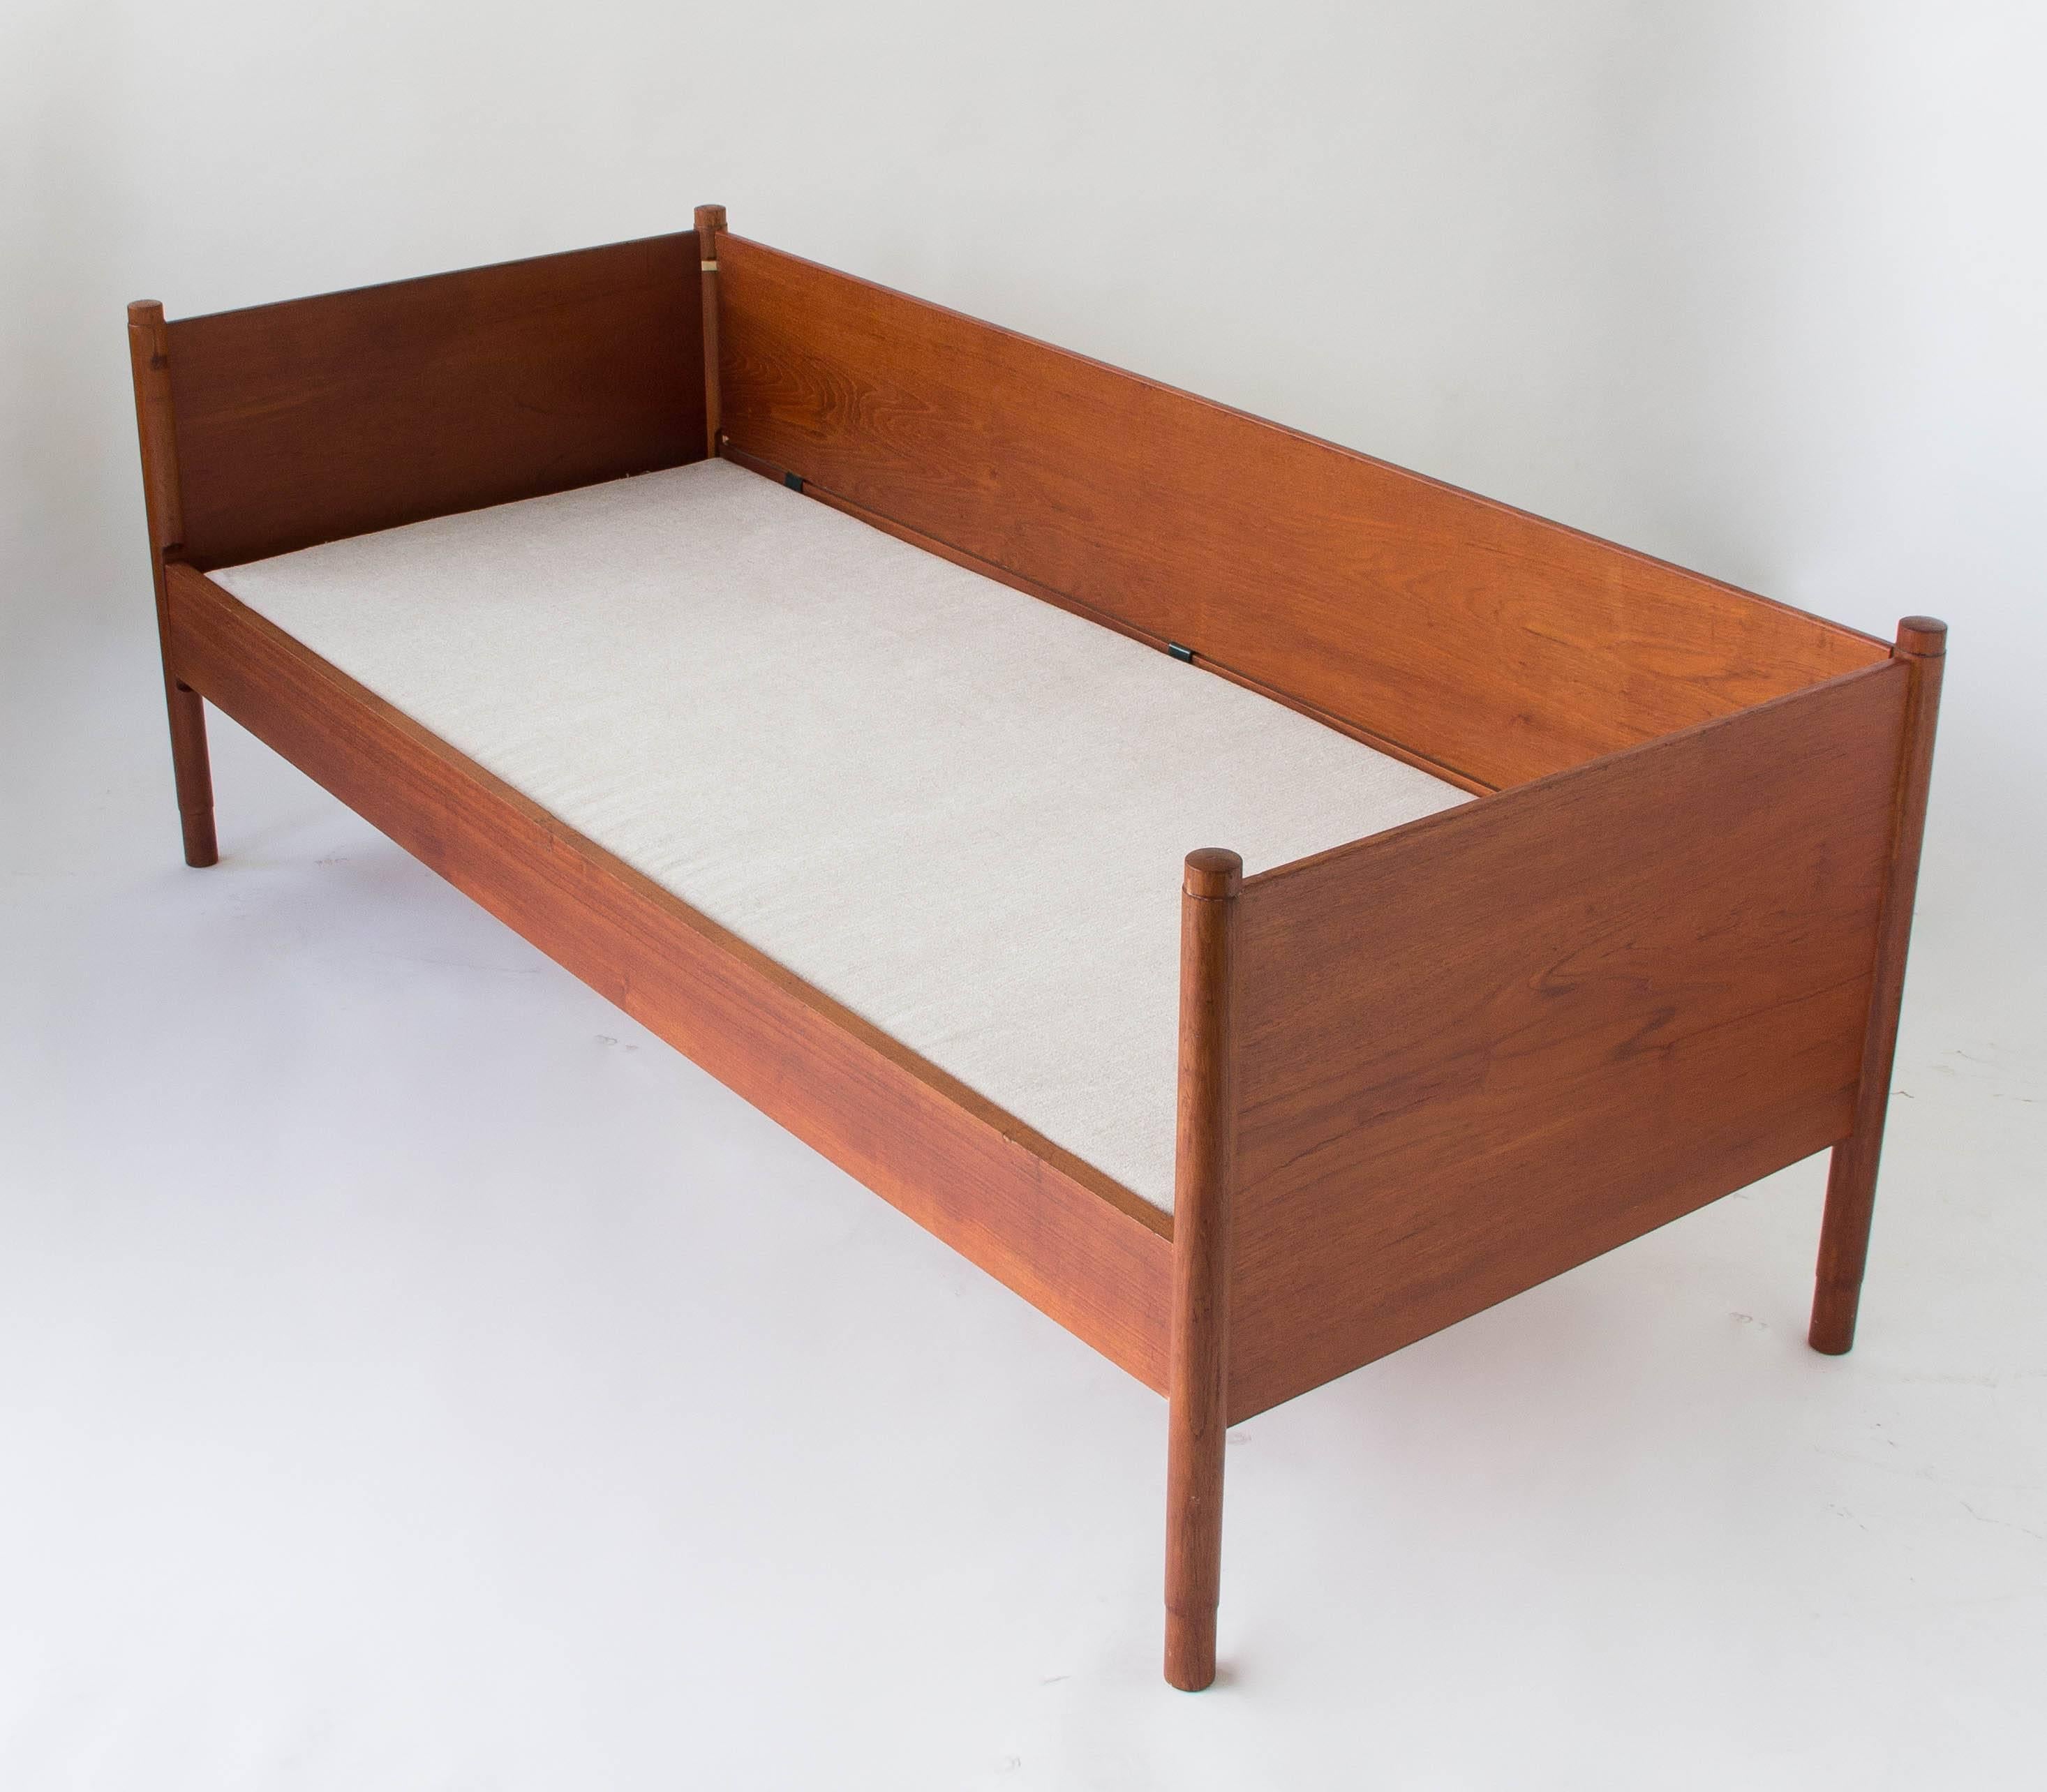 A teak model 136/1 daybed designed in 1951 by Børge Mogensen for Soborg Mobler. The piece has tapered dowel legs with slightly rounded tops. The frame is described by three slim teak panels, fitted to the dowels with proprietary brass hardware. The